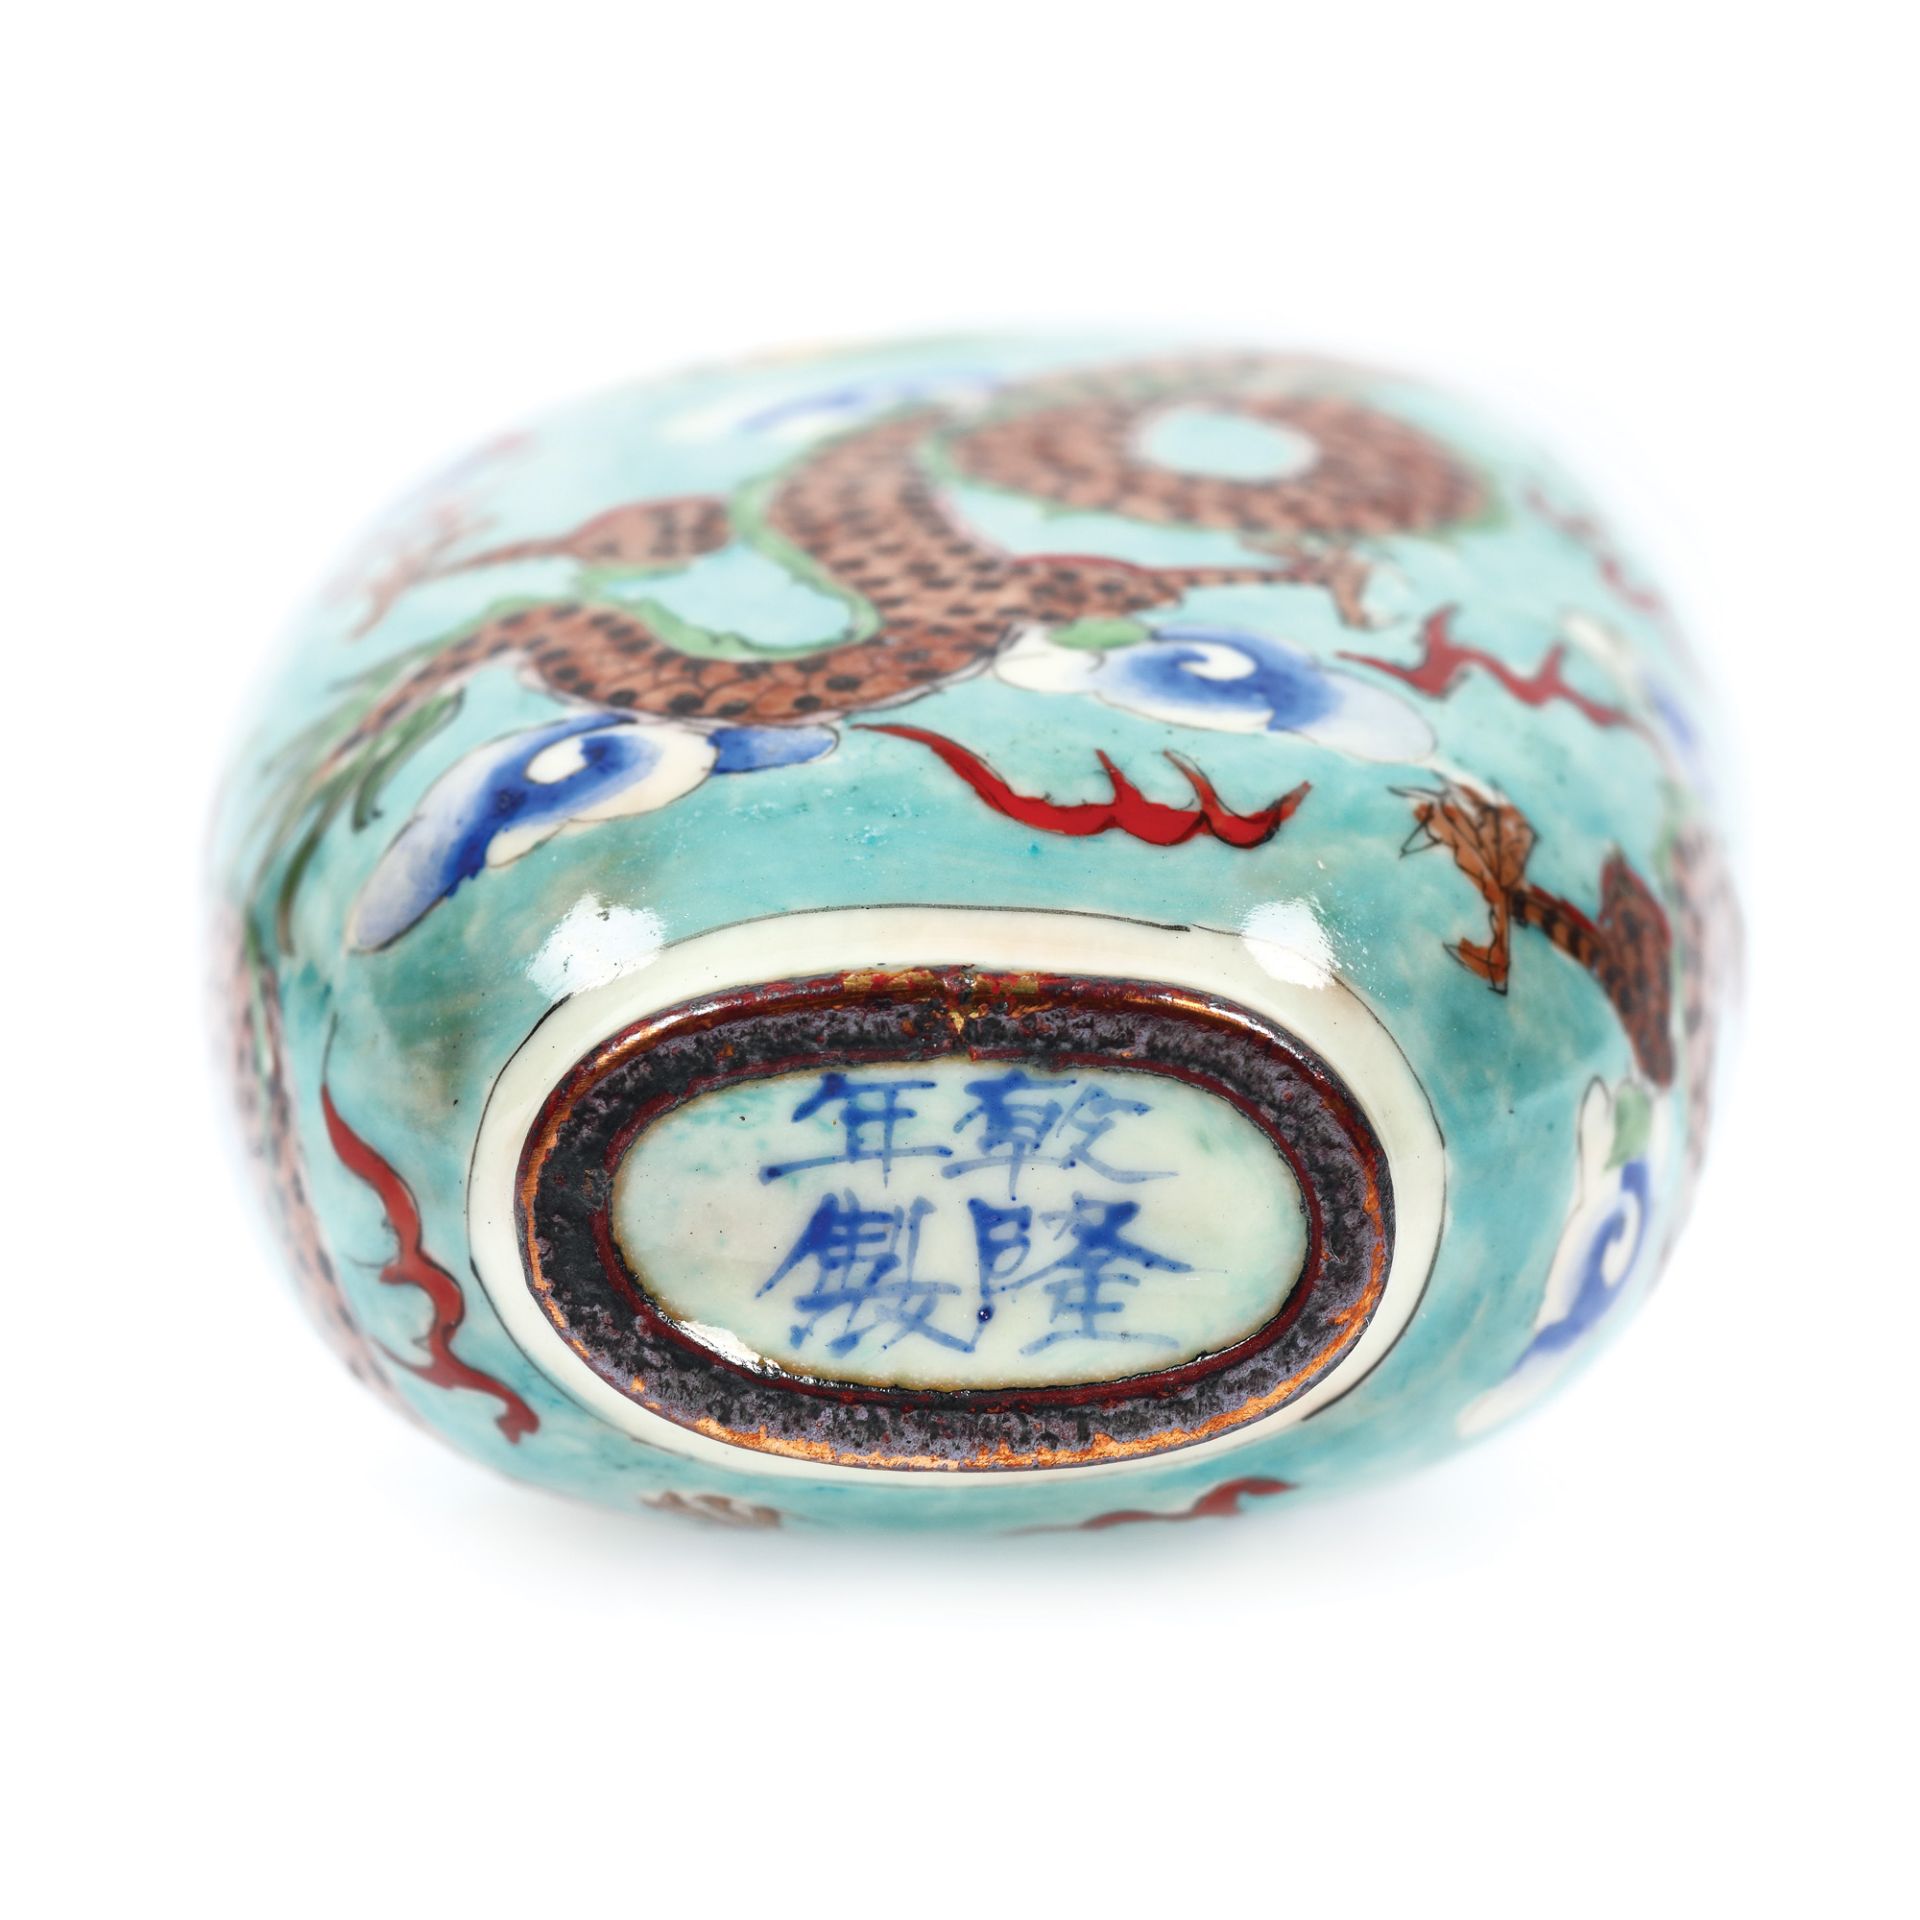 Recipient for sniffing, Beijing enamel, ivory and amber stopper, decorated with dragons hunting pear - Image 4 of 4